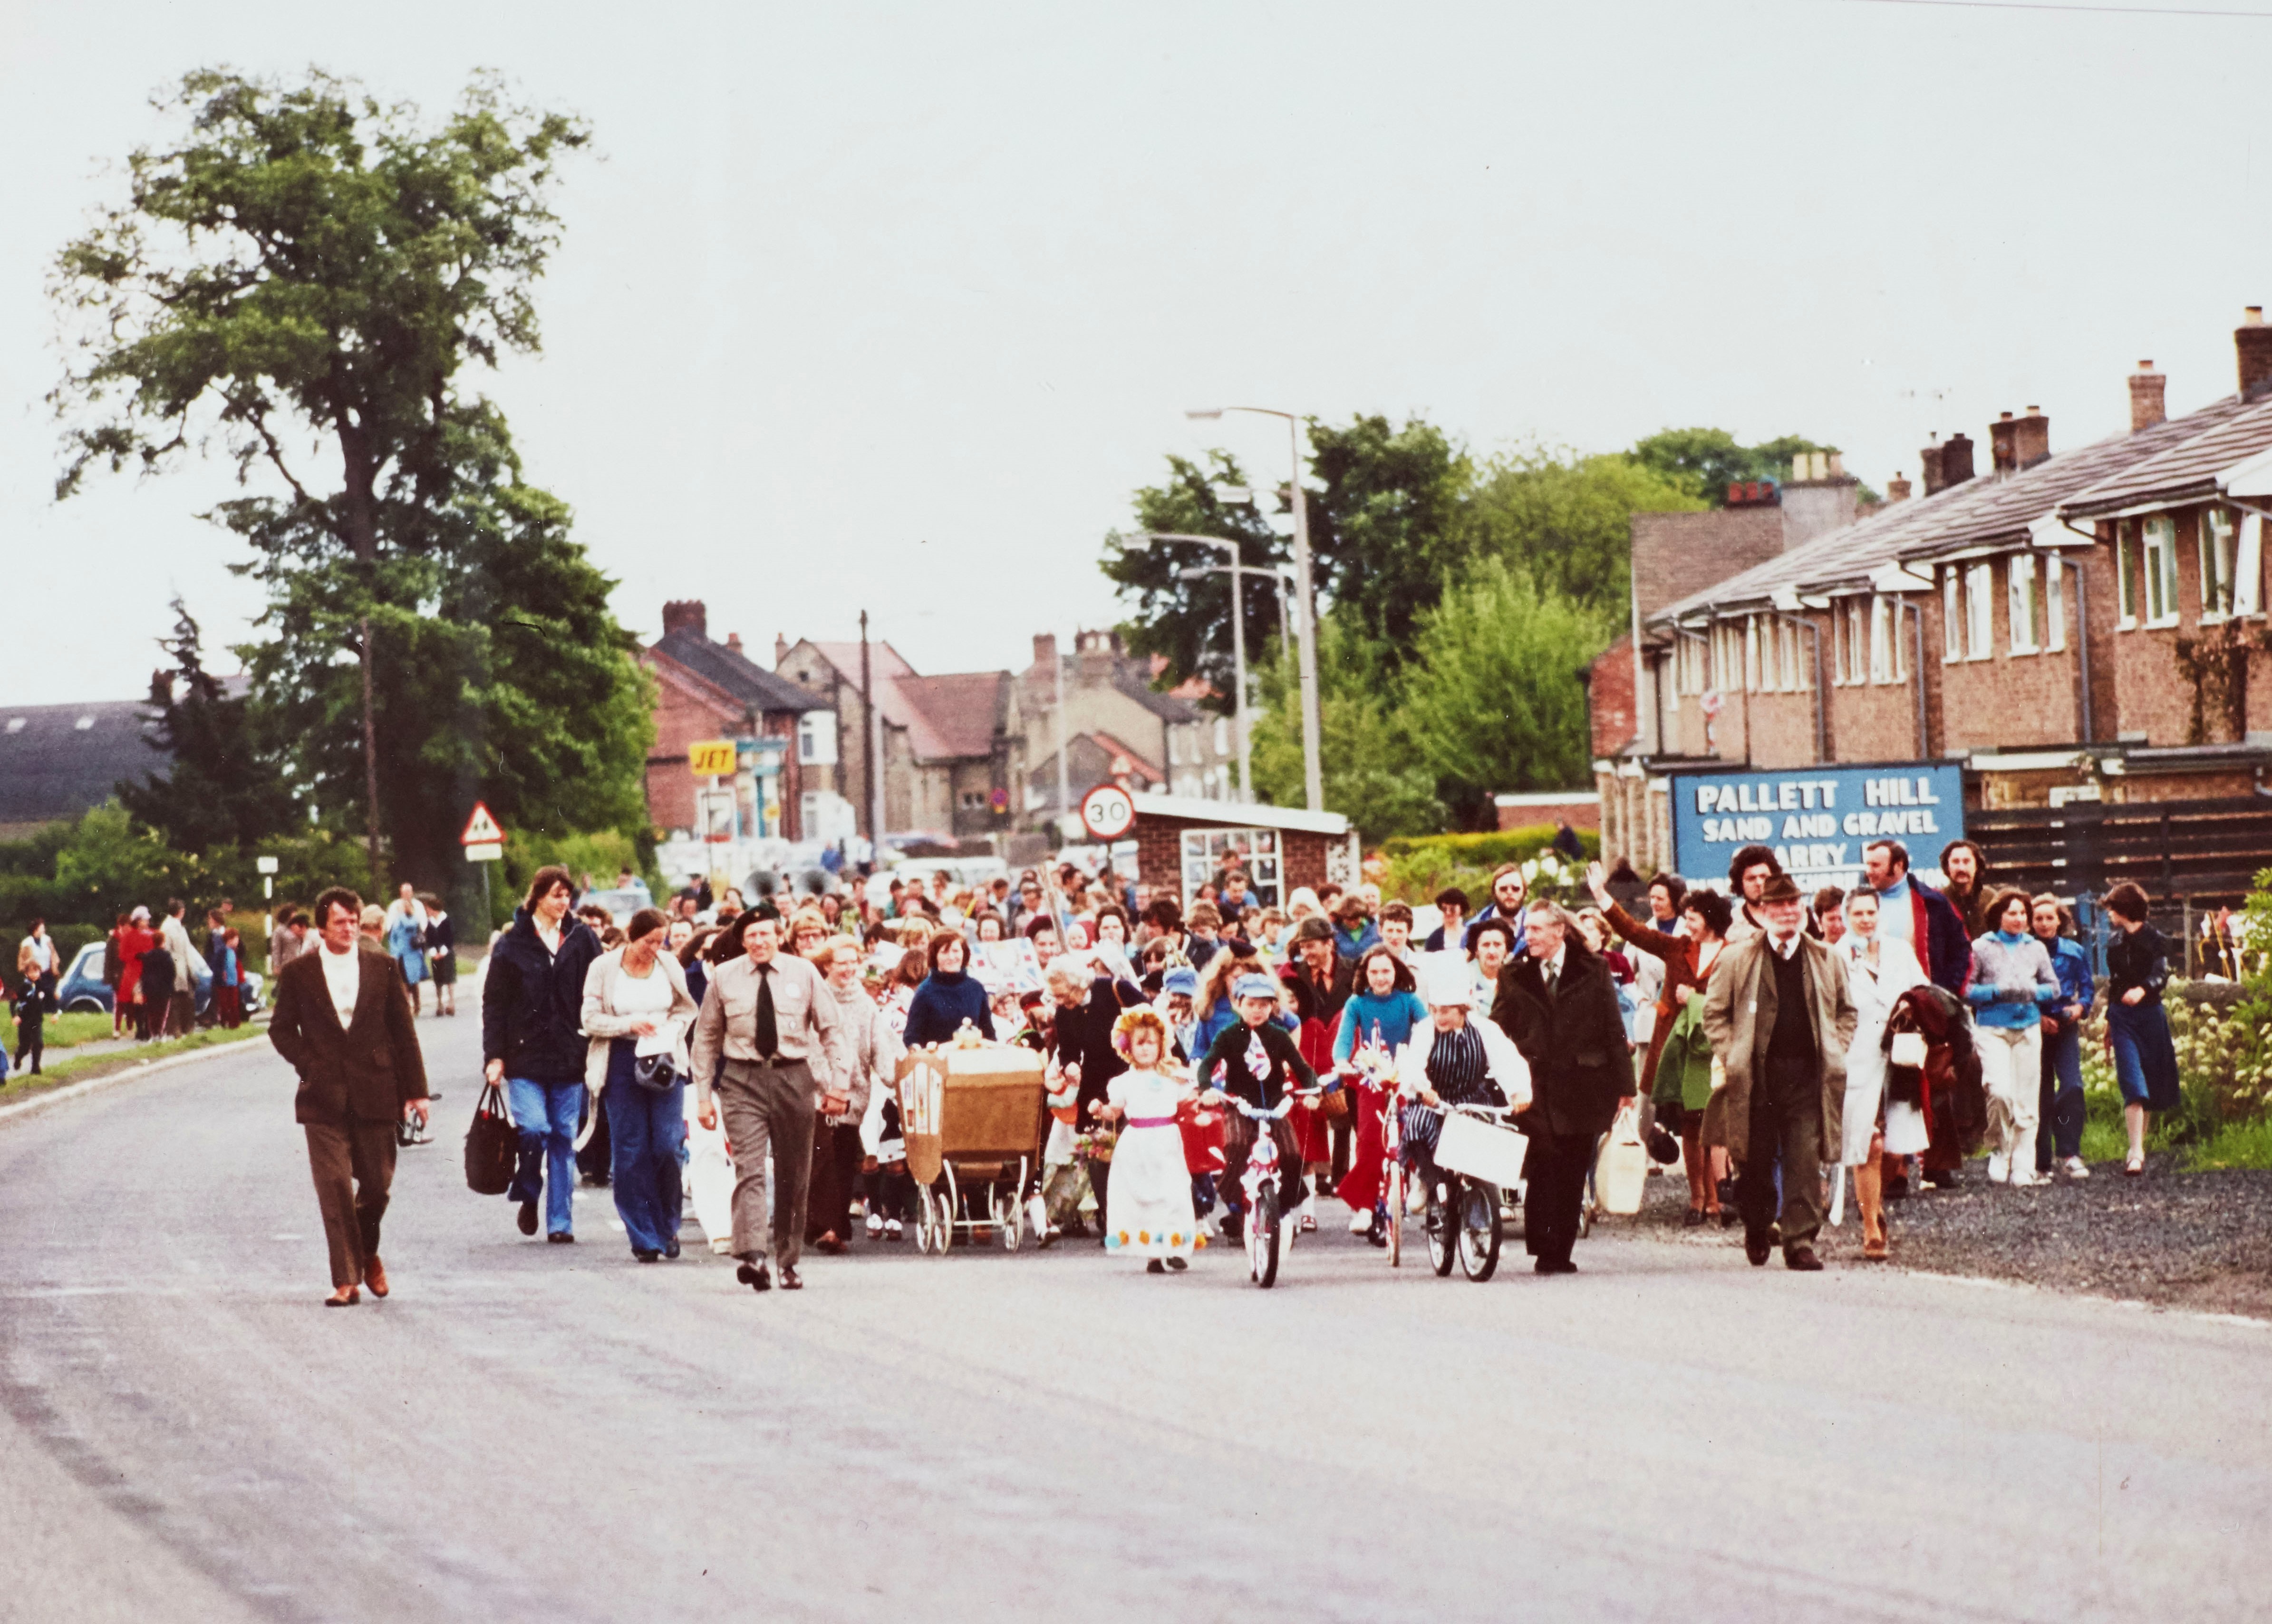 •	Celebrations in Catterick village to mark the Silver Jubilee of Elizabeth II in 1977, from Catterick Parish Council records.